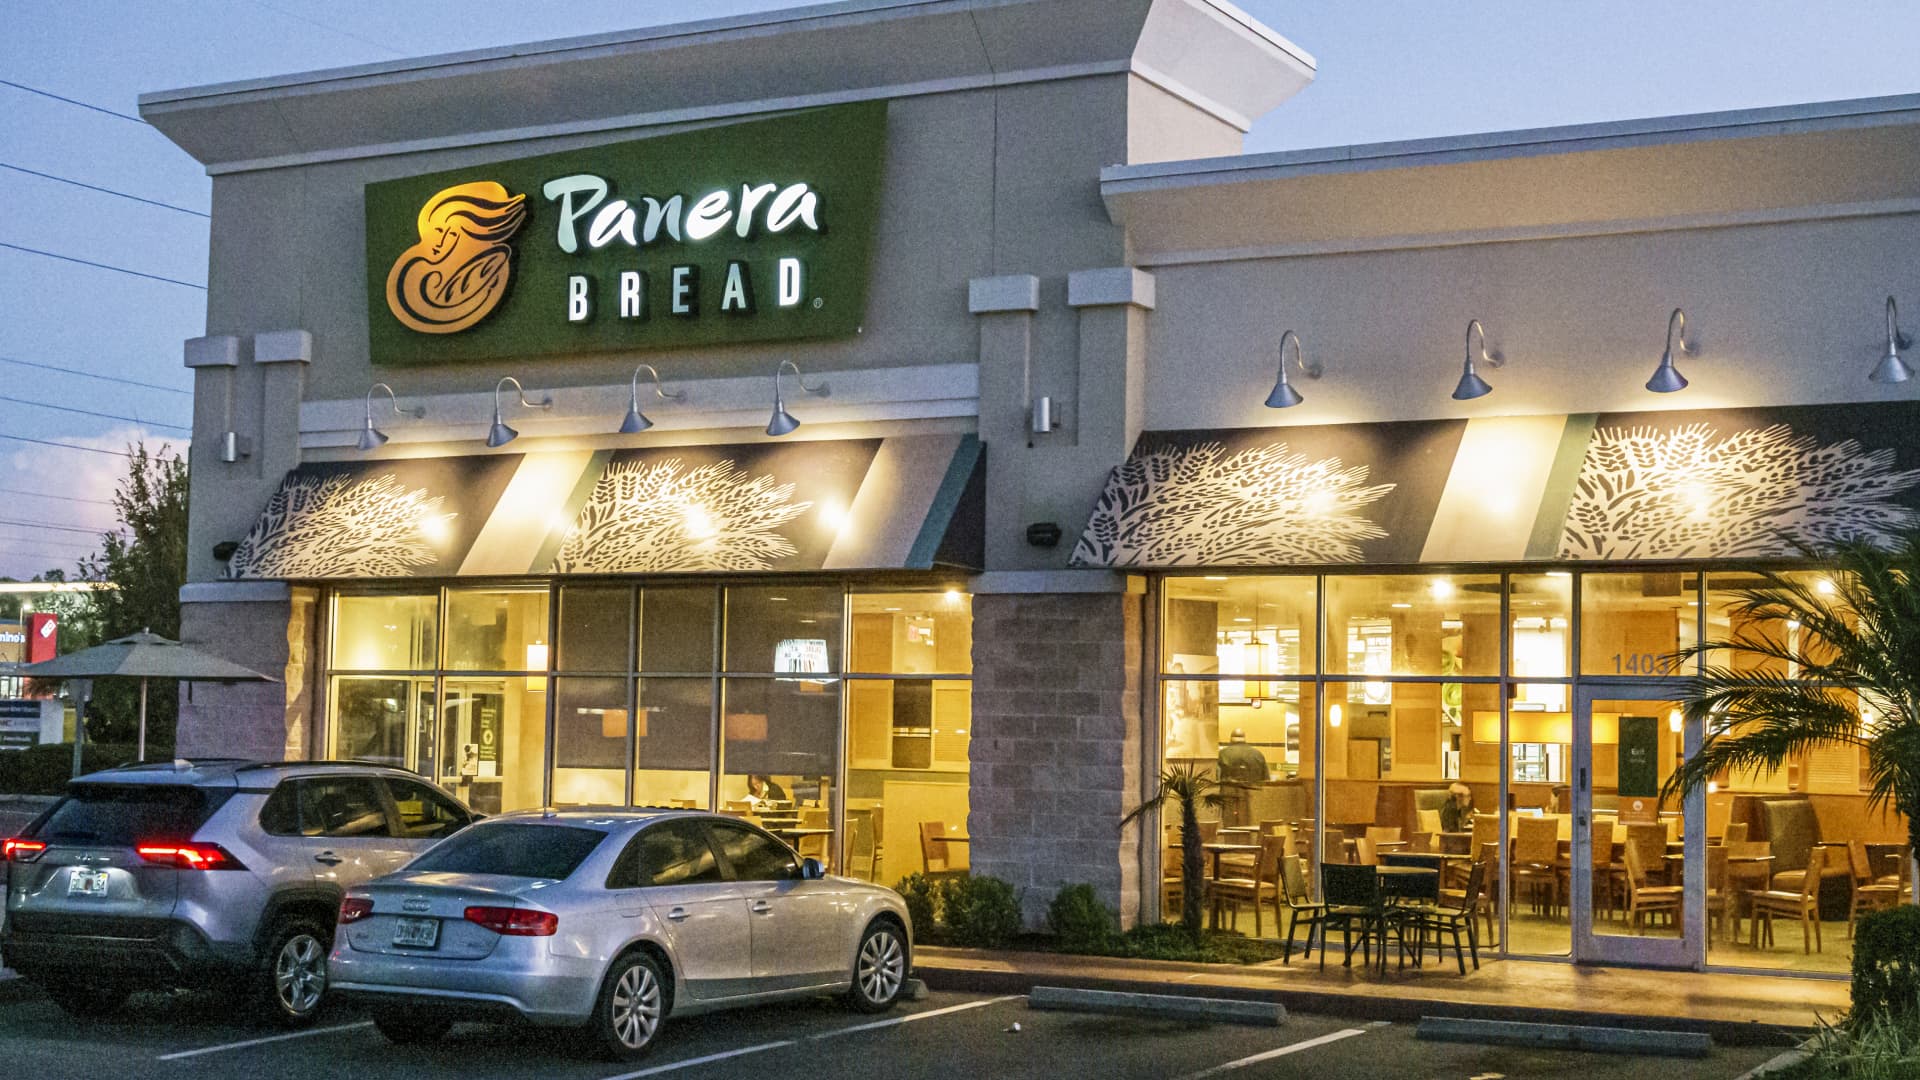 Panera Bread tests artificial intelligence technology in drive-thru lanes